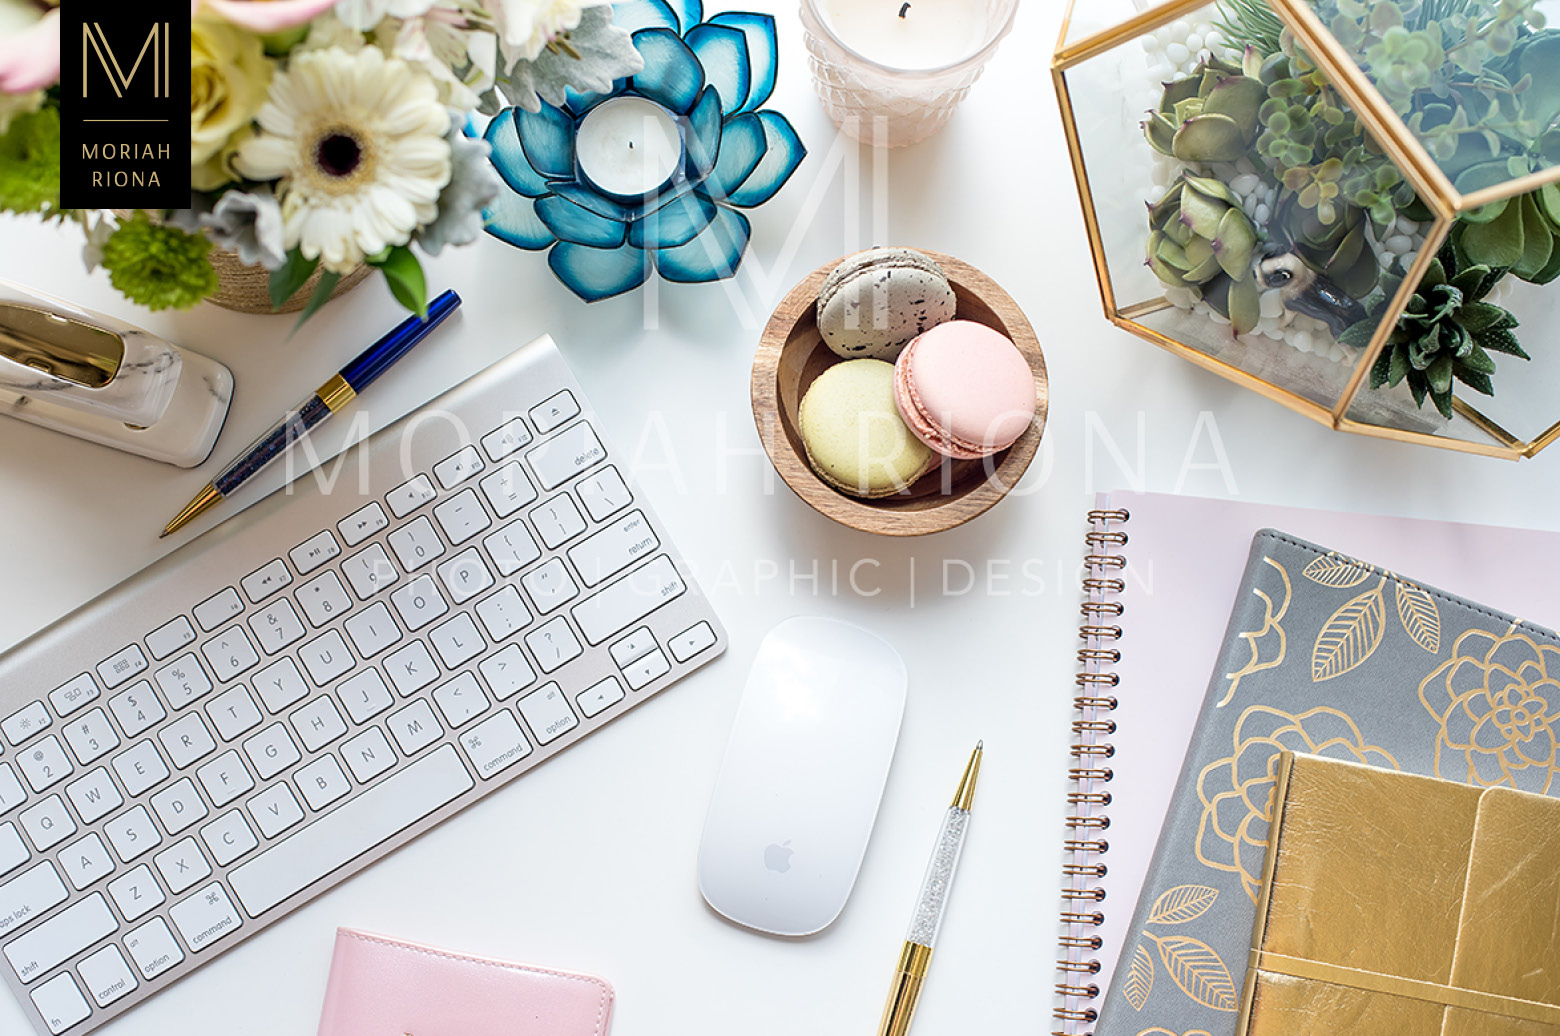 Custom Styled Stock Photos: Denver Life Coach, The Inspired Mama | Feminine brand photography, flatlays and office scenes for life coach brand. Click through to see more! #styledstock #brandphotos #branding #marketing #coach